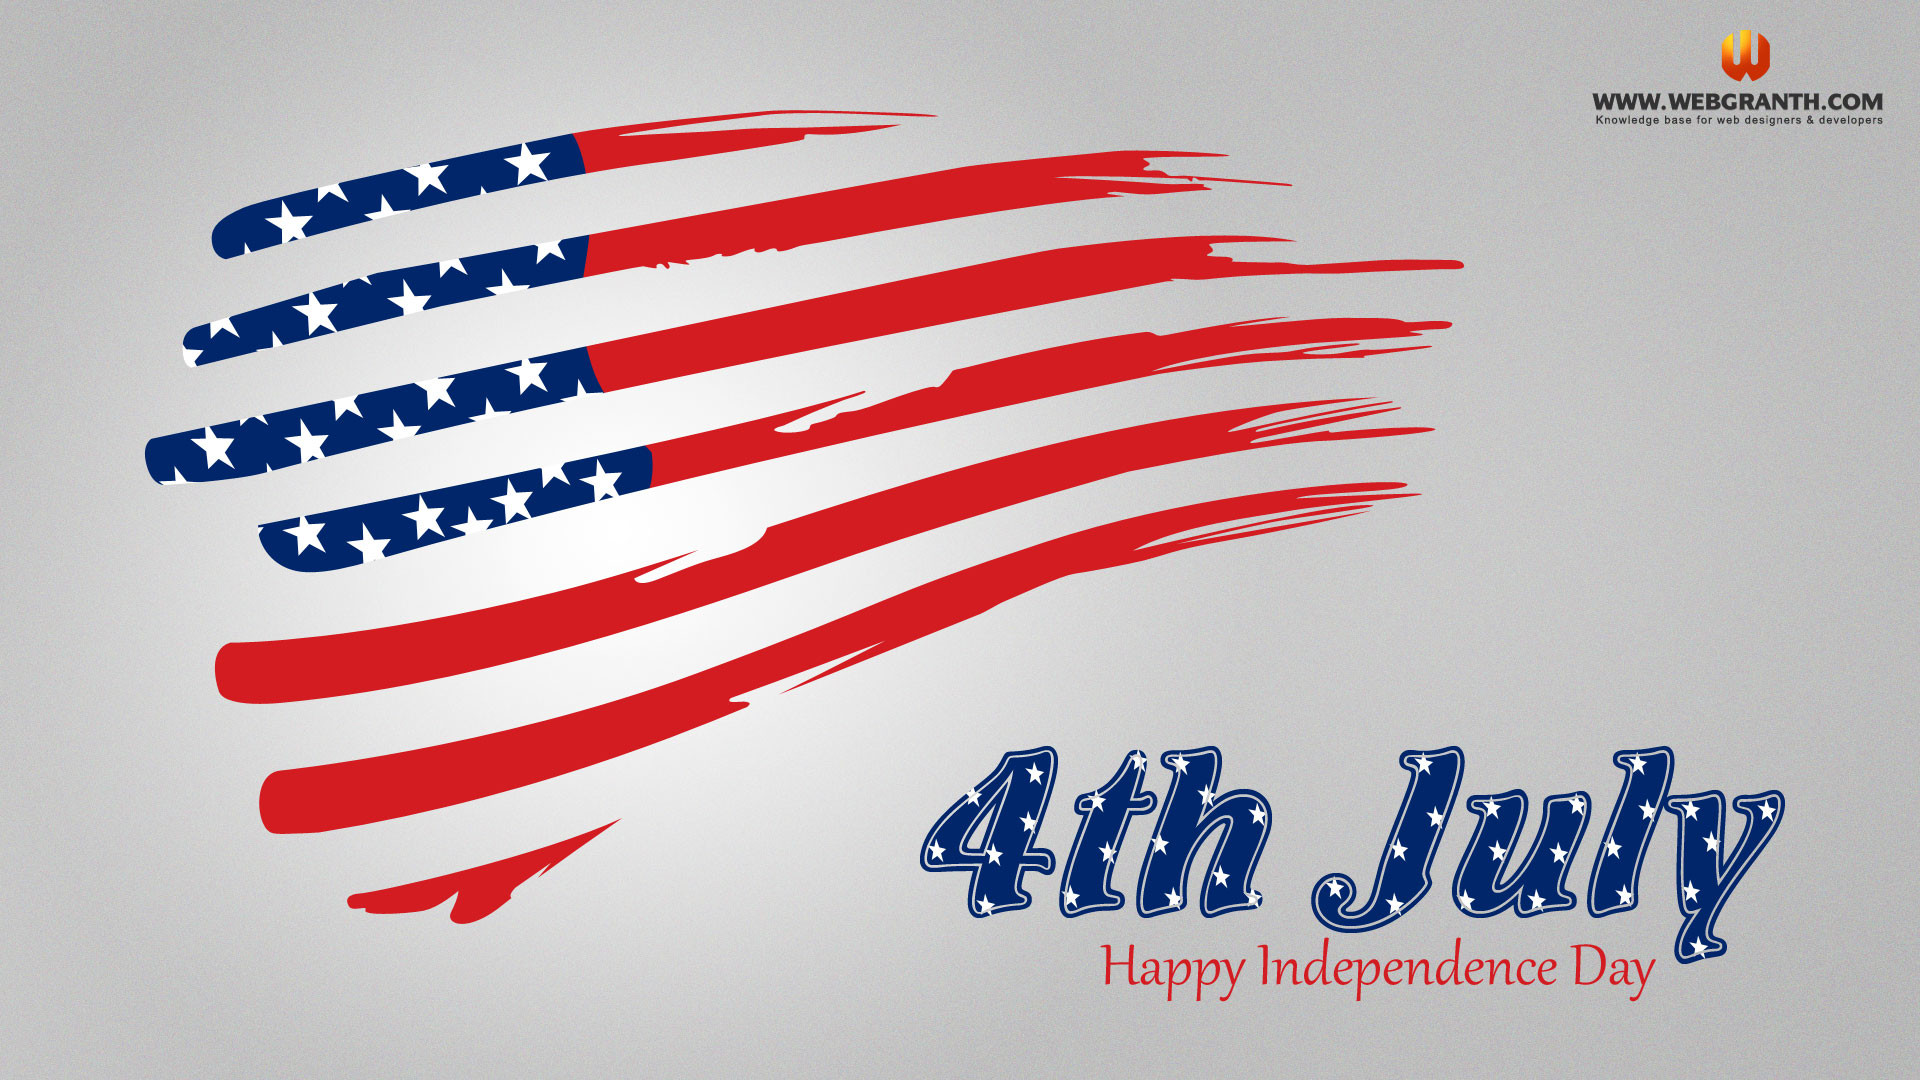 1920x1080 US Independence Day Wallpaper 2013: 4 July Independence Day Wallpaper Free